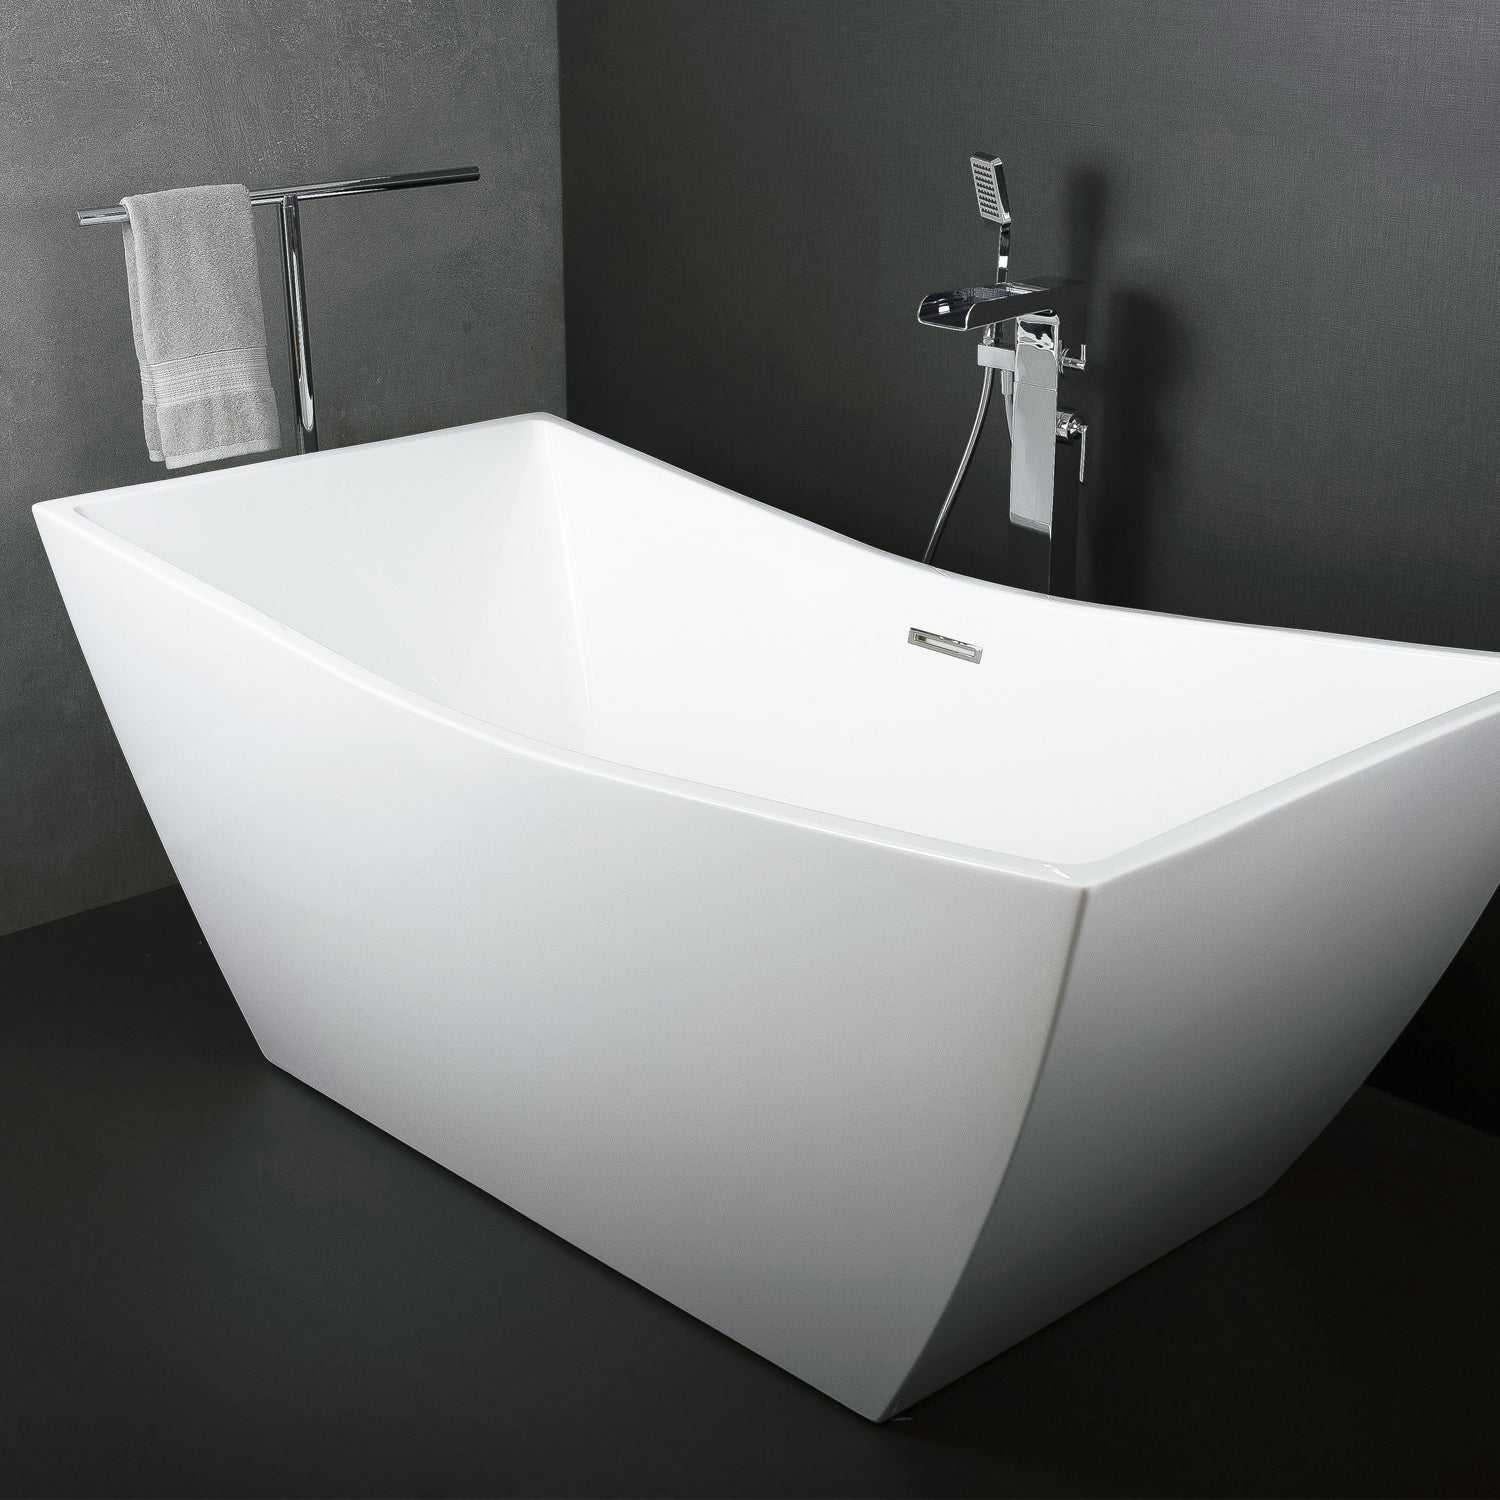 DAX Square Freestanding High Gloss Acrylic Bathtub with Central Drain and Overflow, Stainless Steel Frame, 66-15/16 x 26-3/4 x 31-1/2 Inches (BT-8086)